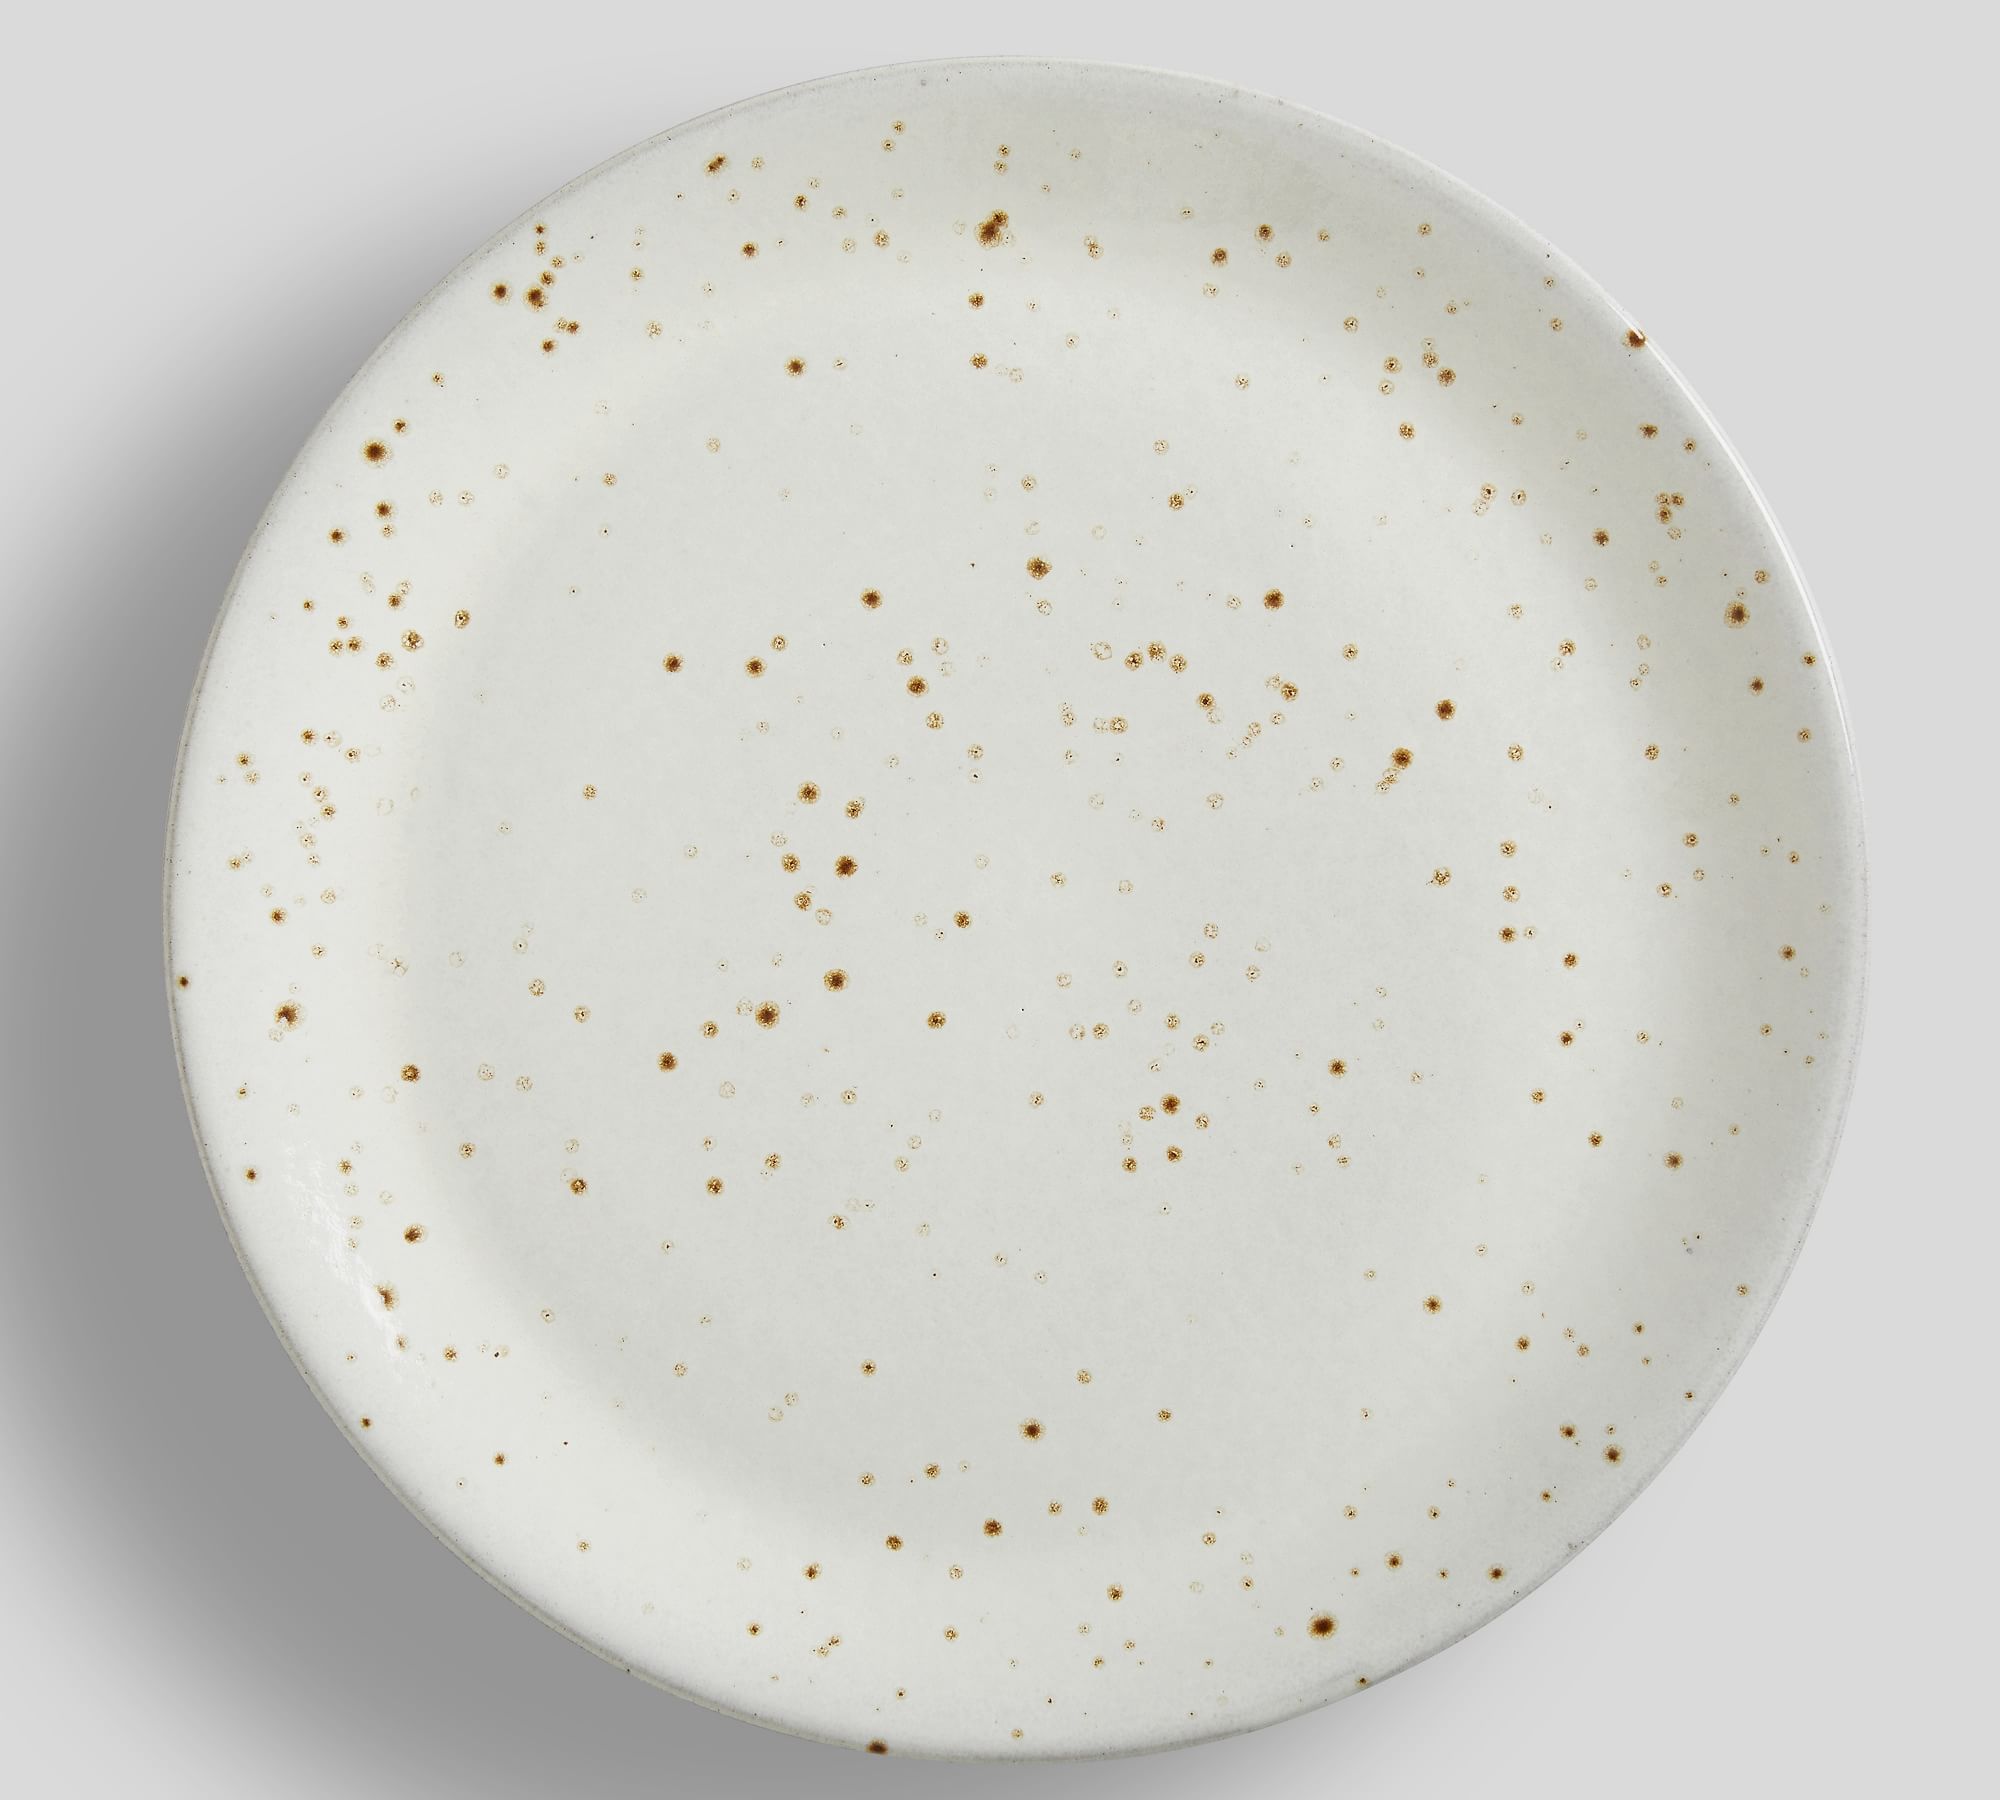 Rustic Speckled Handcrafted Terracotta Dinner Plates - Set of 4